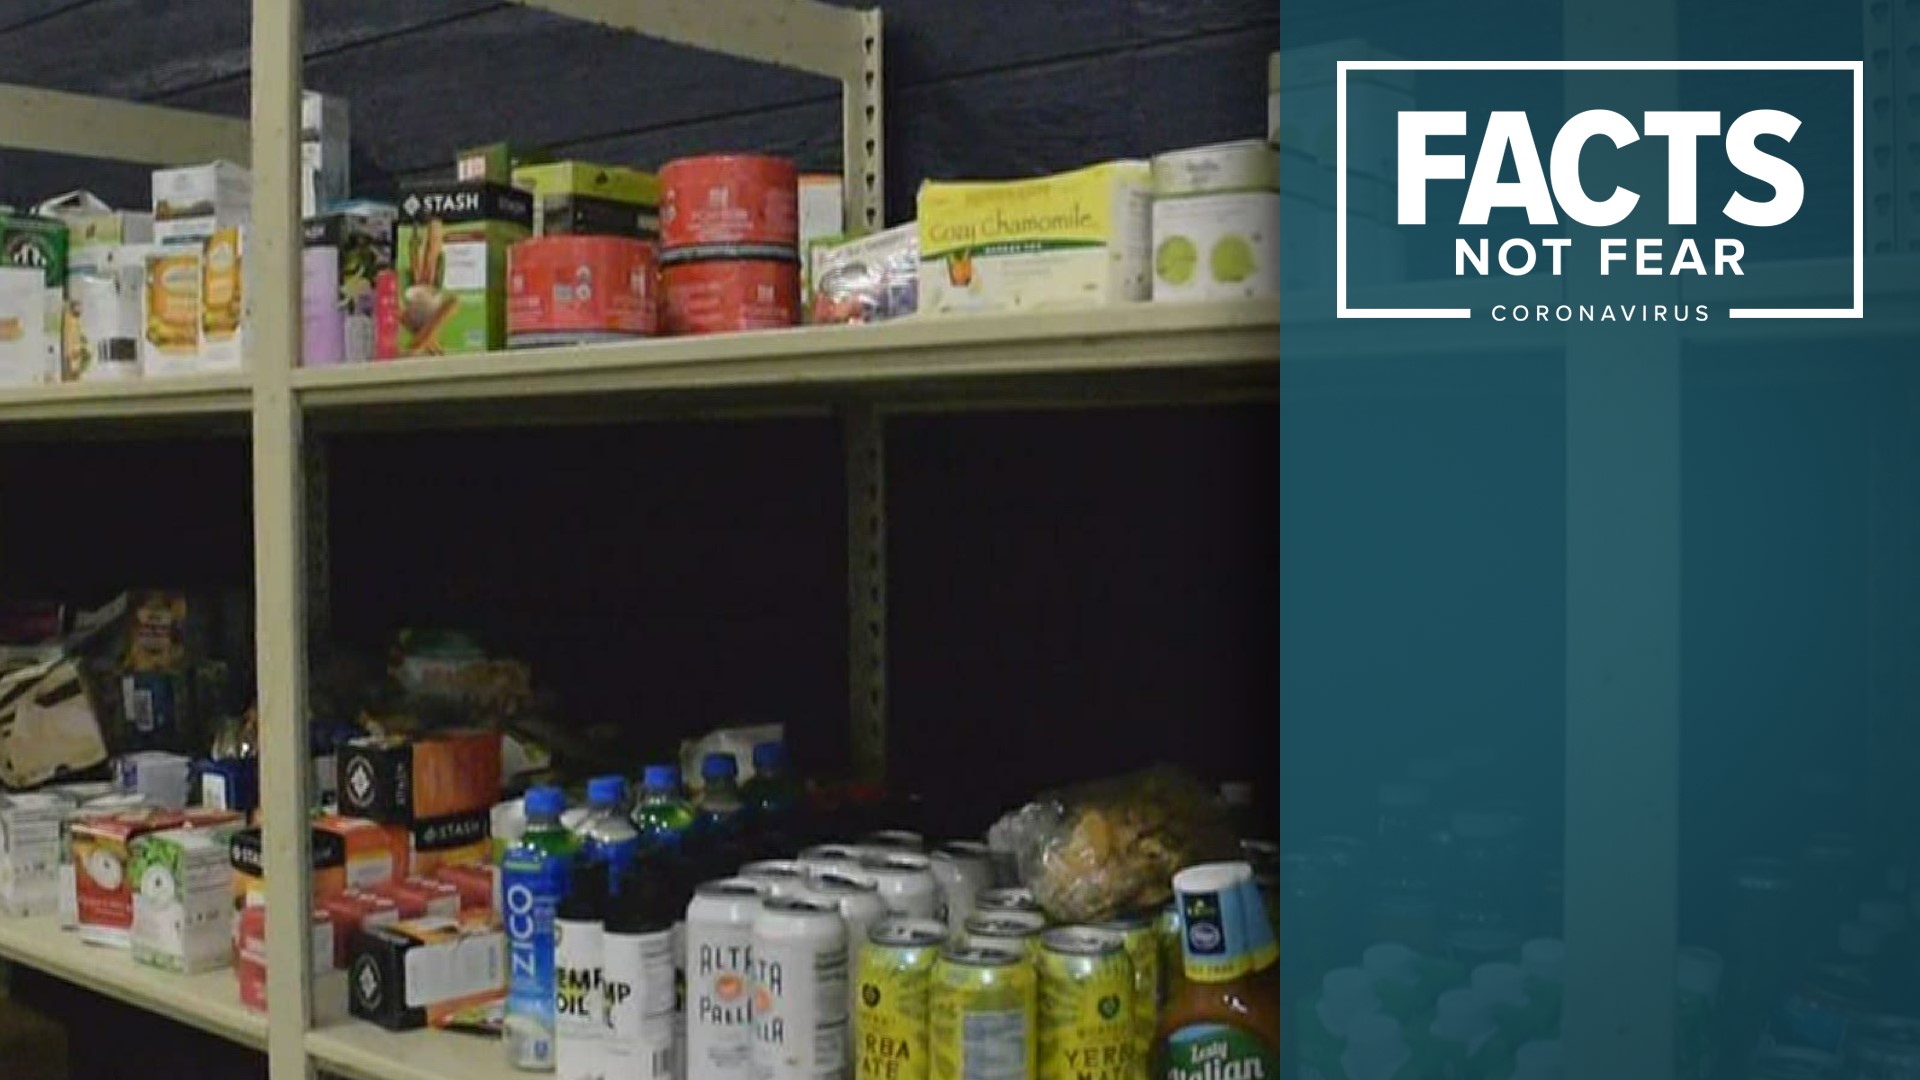 With record unemployment and money tight or not coming in at all, families are in great need of food. The Atlanta Community Food Bank is meeting the challenge.